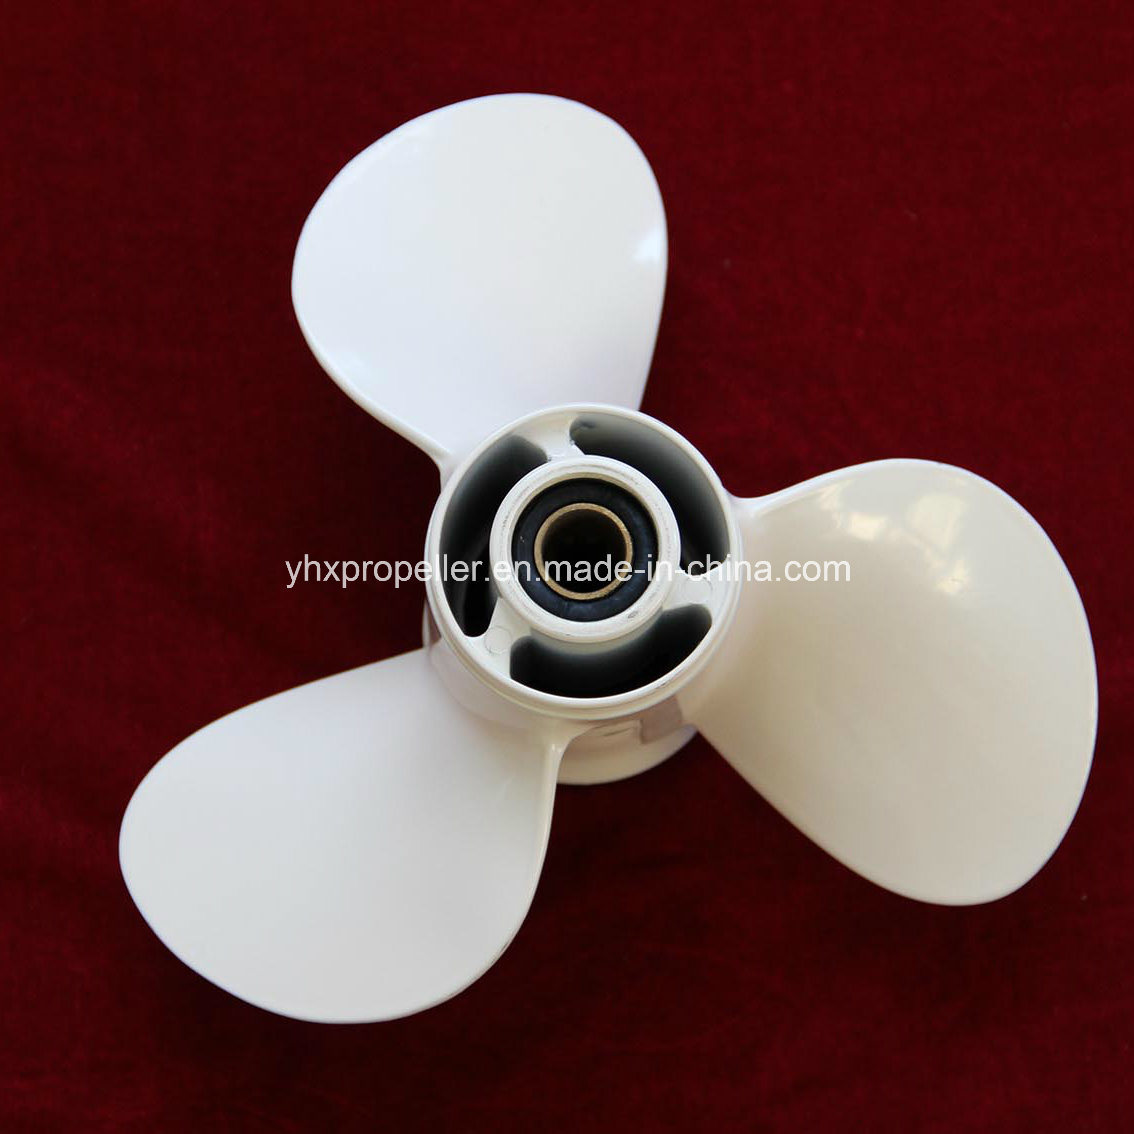 YAMAHA Brand 25-30HP for 9 7/8X10 1/2 Size Propeller